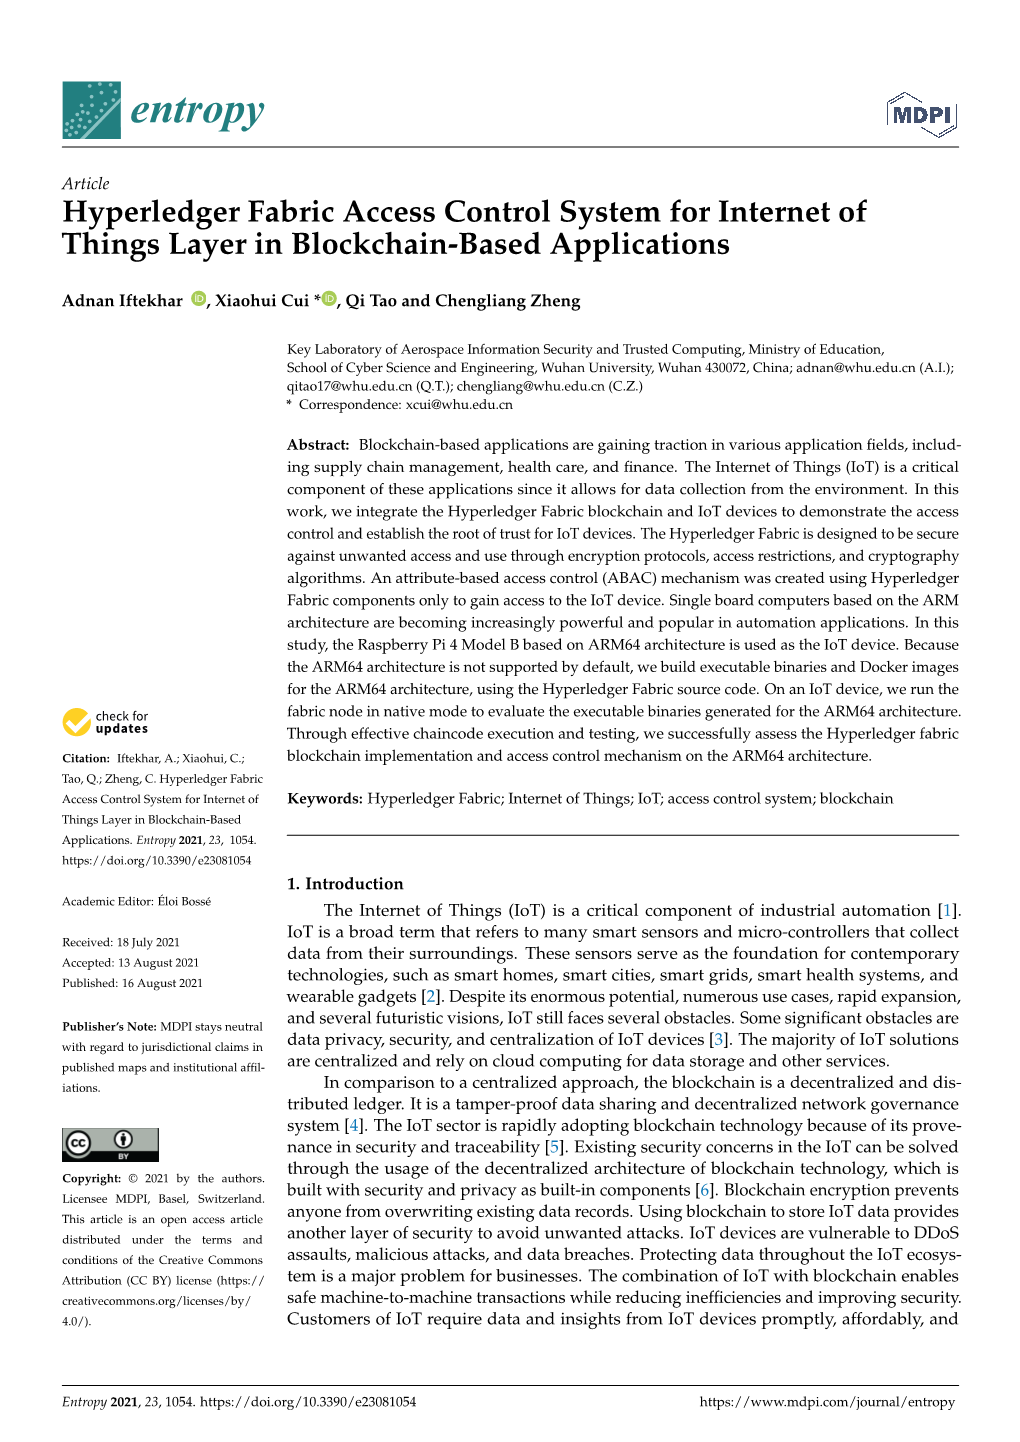 Hyperledger Fabric Access Control System for Internet of Things Layer in Blockchain-Based Applications